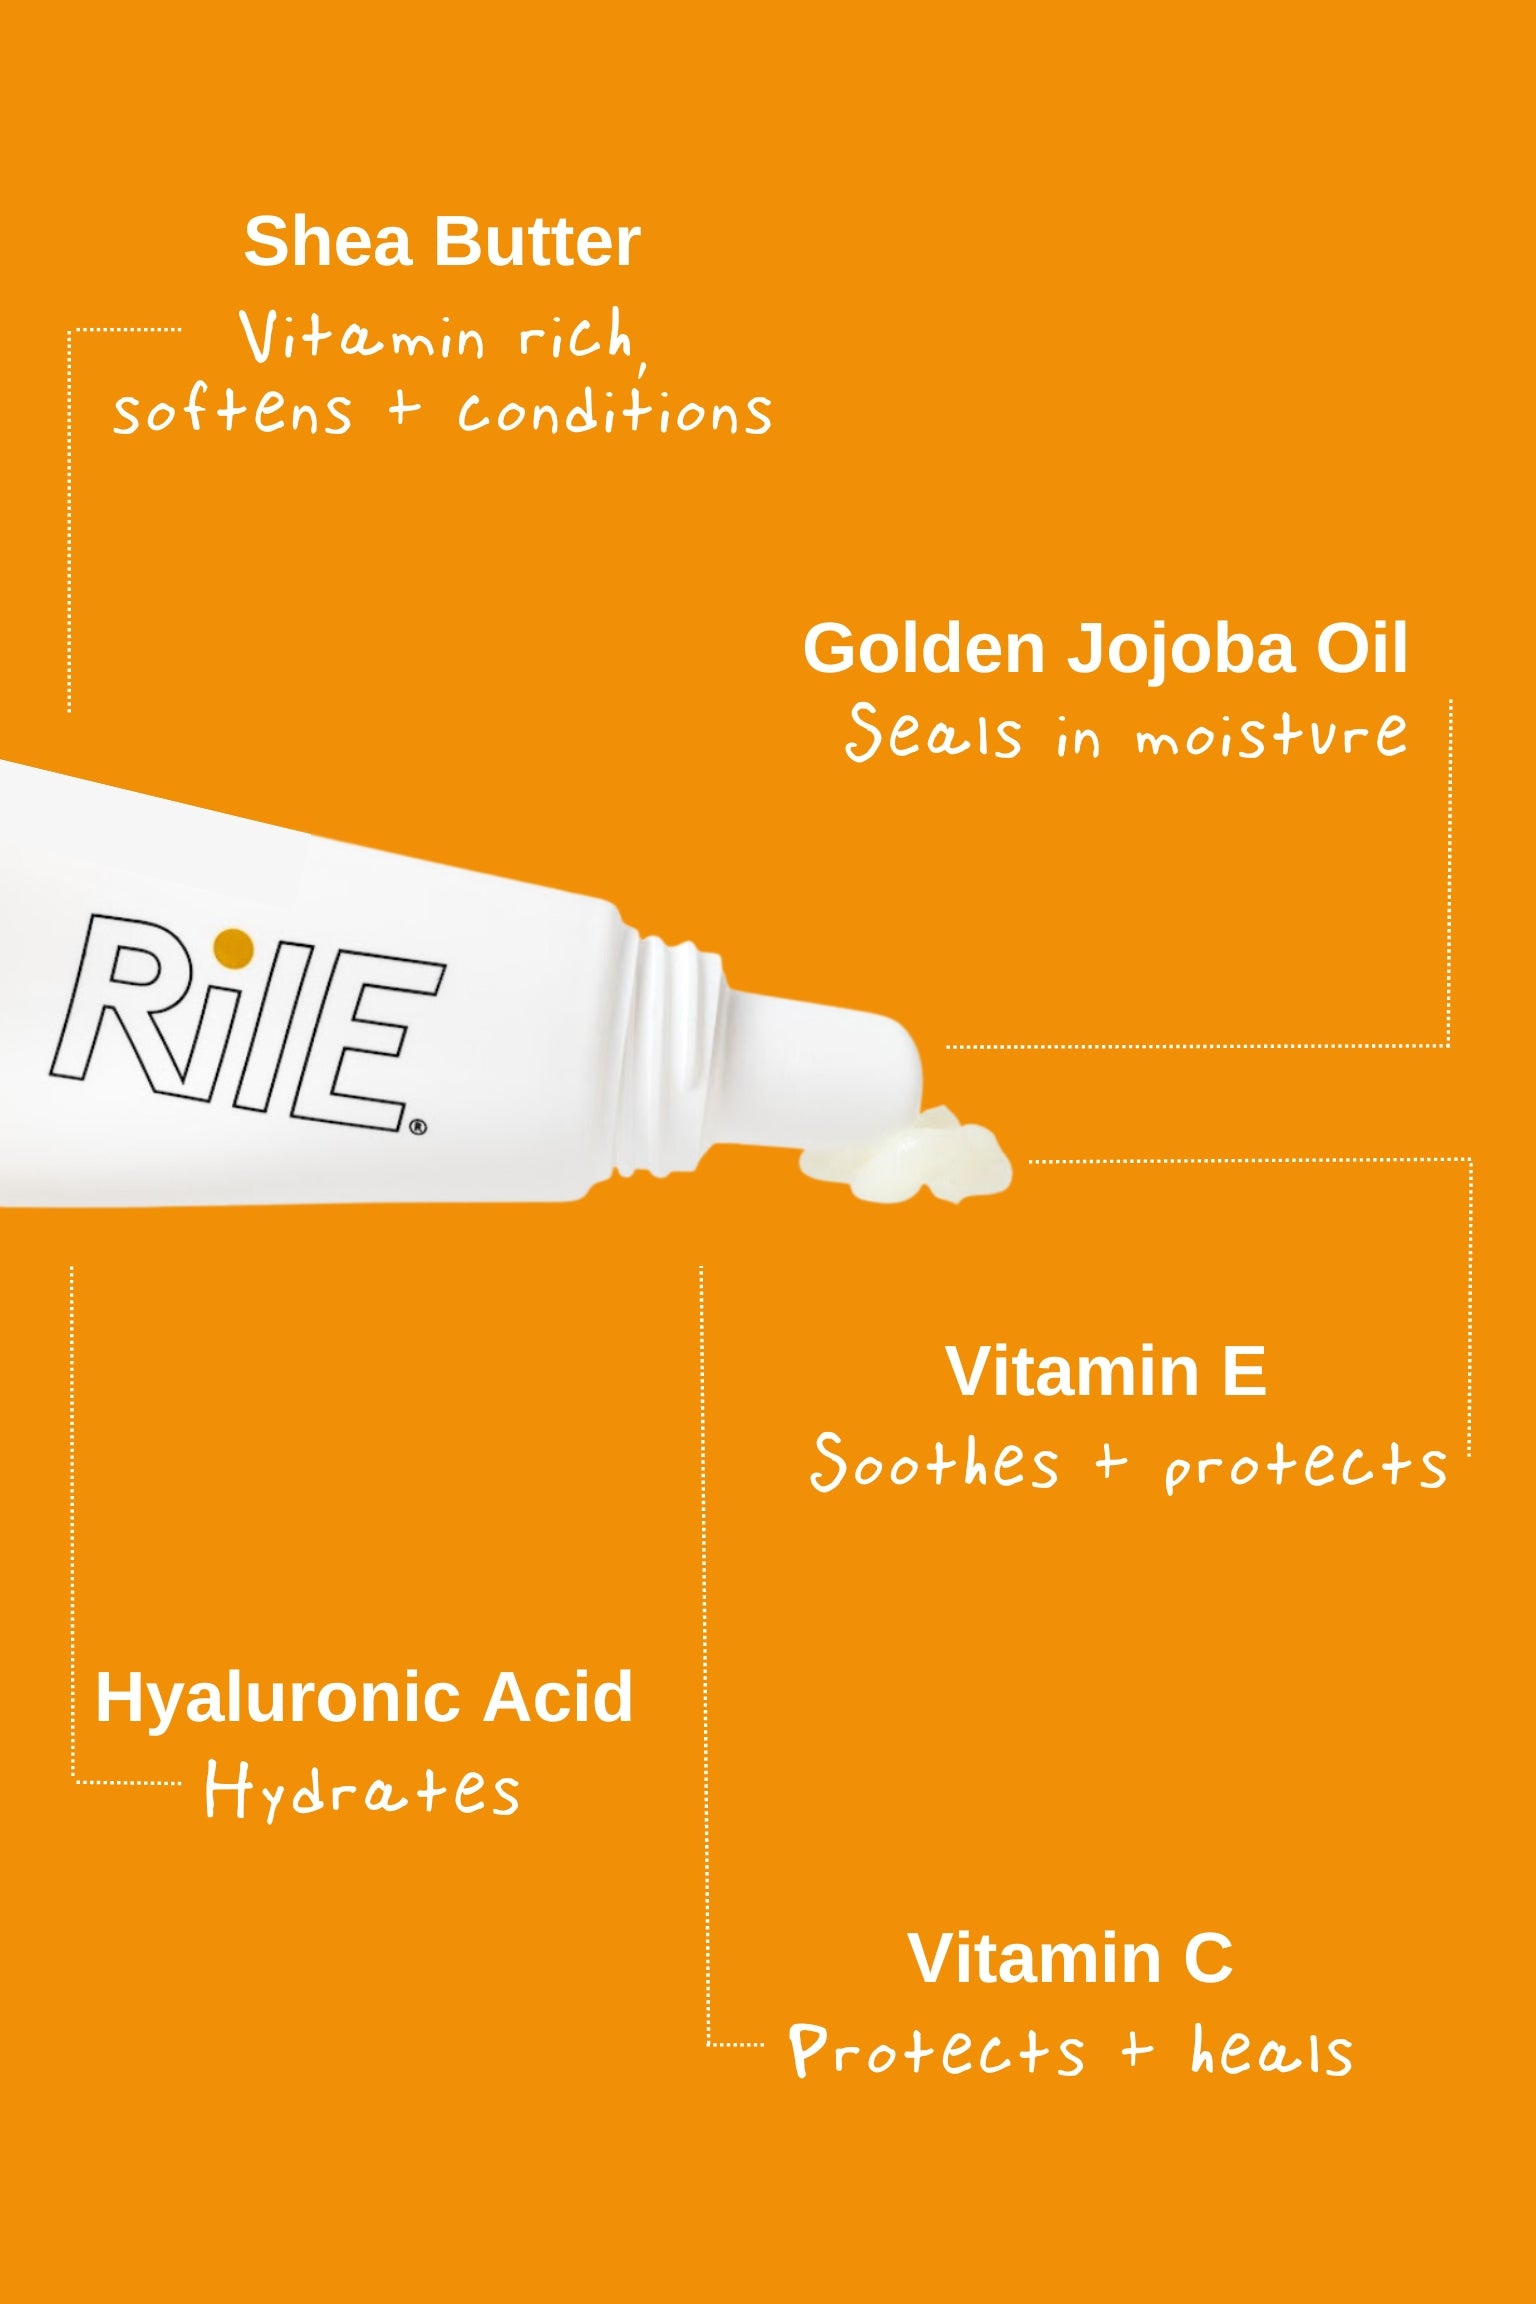 The white Rile tube showing the lip balm. The ingredients Shea butter, golden jojoba oil, vitamin e, hyaluronic acid and vitamin c are highlighted and how they soothe, protect and soften lips.